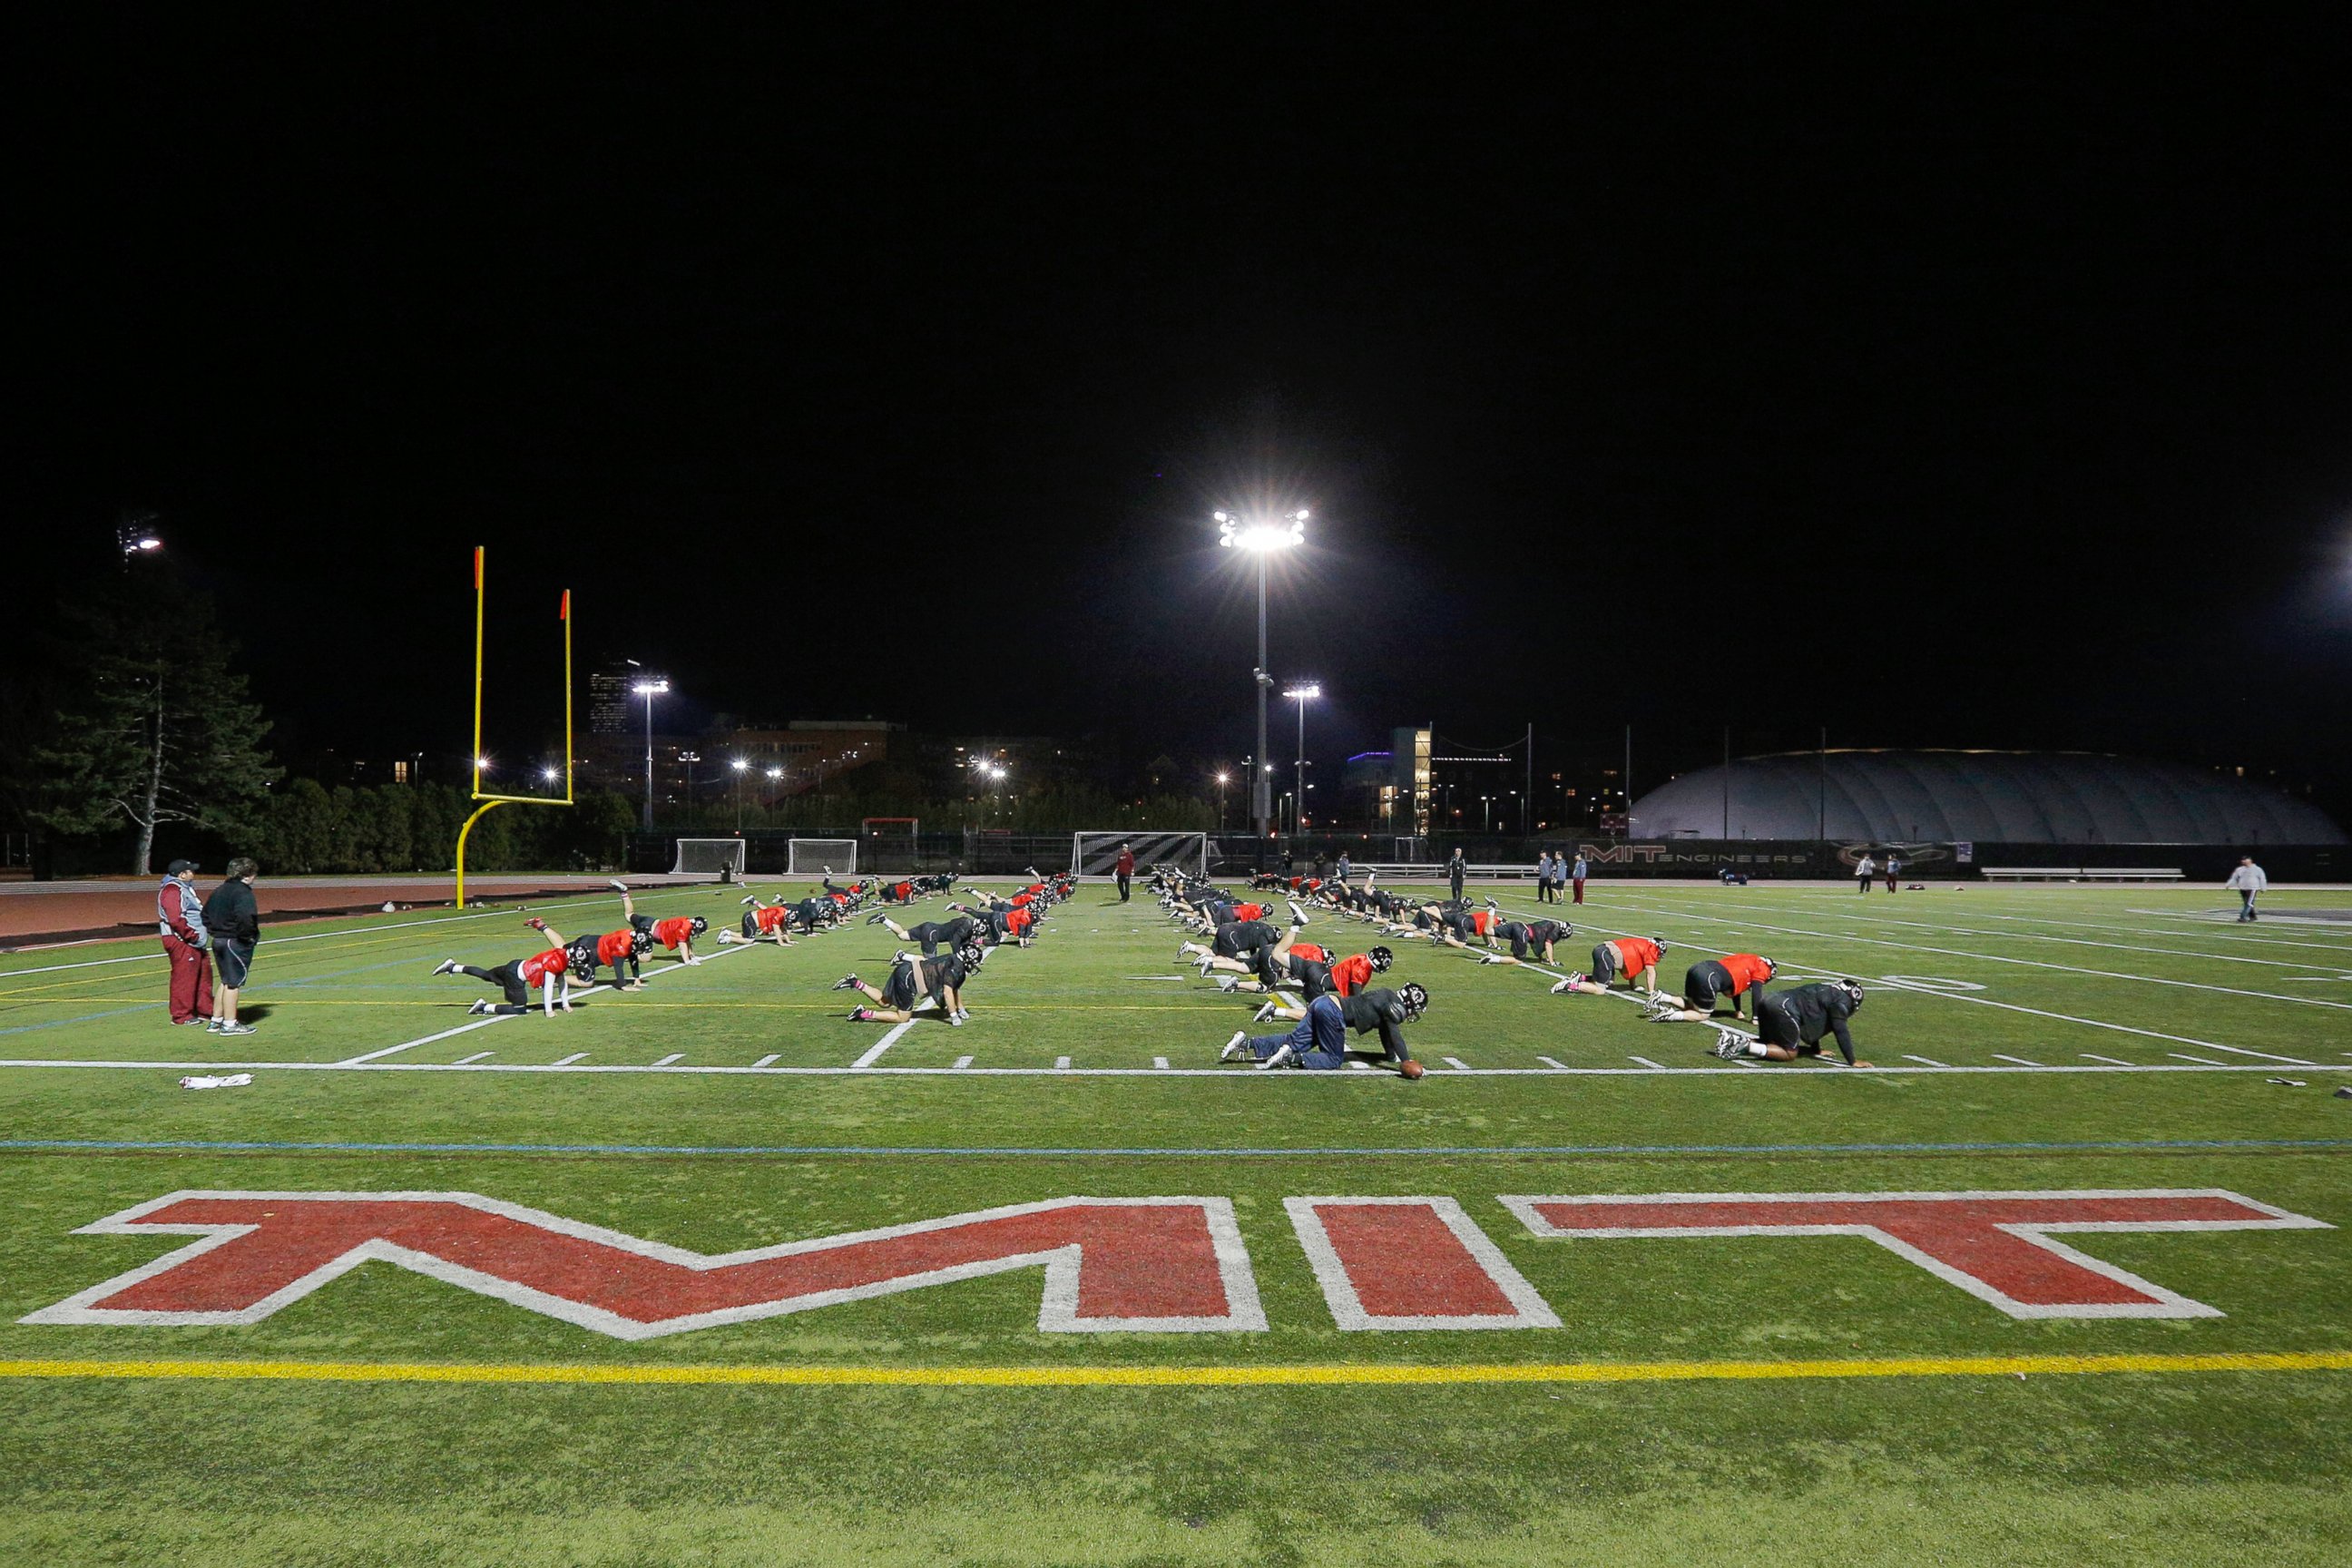 PHOTO: Massachusetts Institute of Technology (MIT) Engineers football players attend practice in Cambridge, Mass., Nov. 13, 2014.